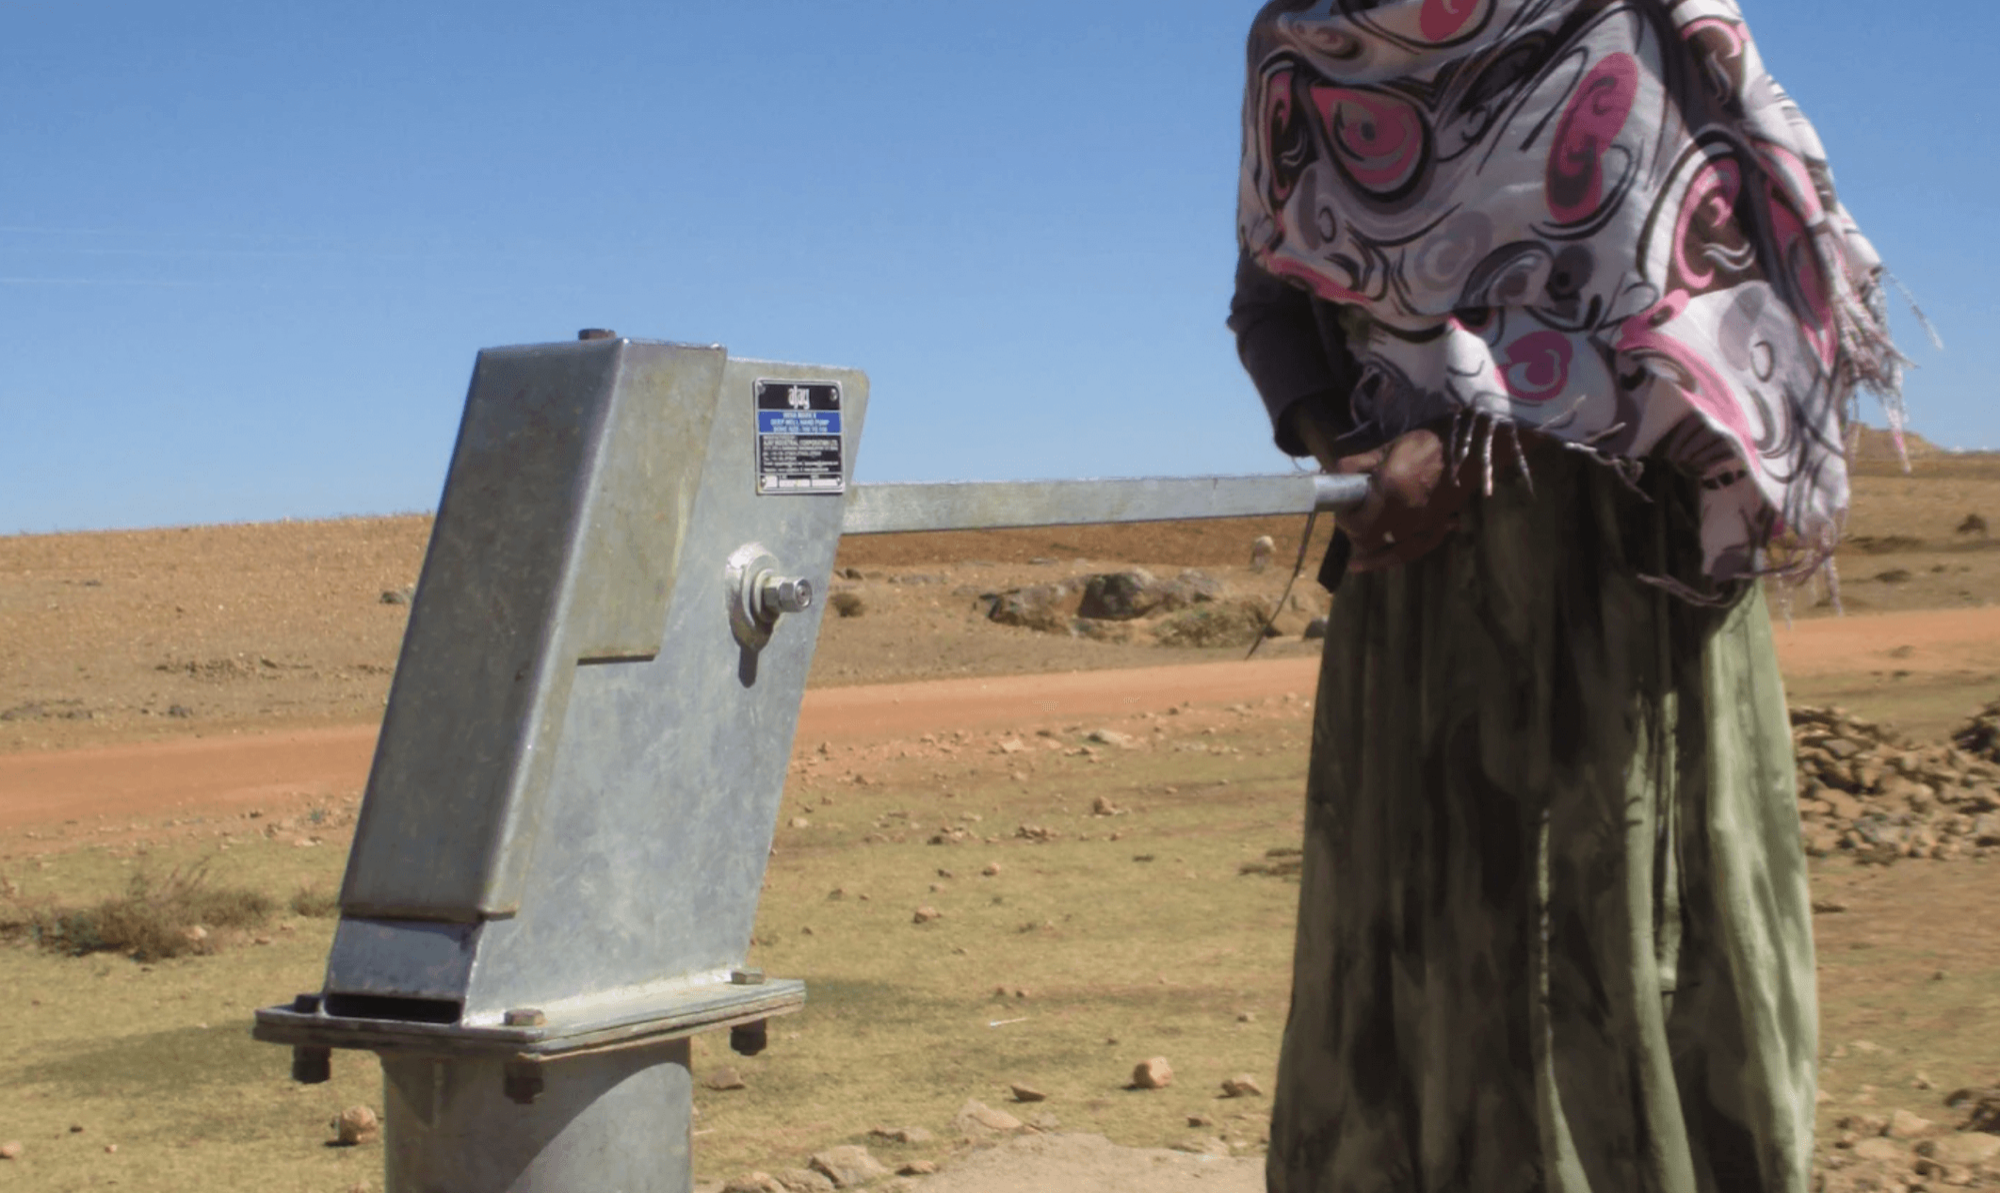 Xander Kostroma is Helping Eritrea Access Clean Water and Fight Climate Change